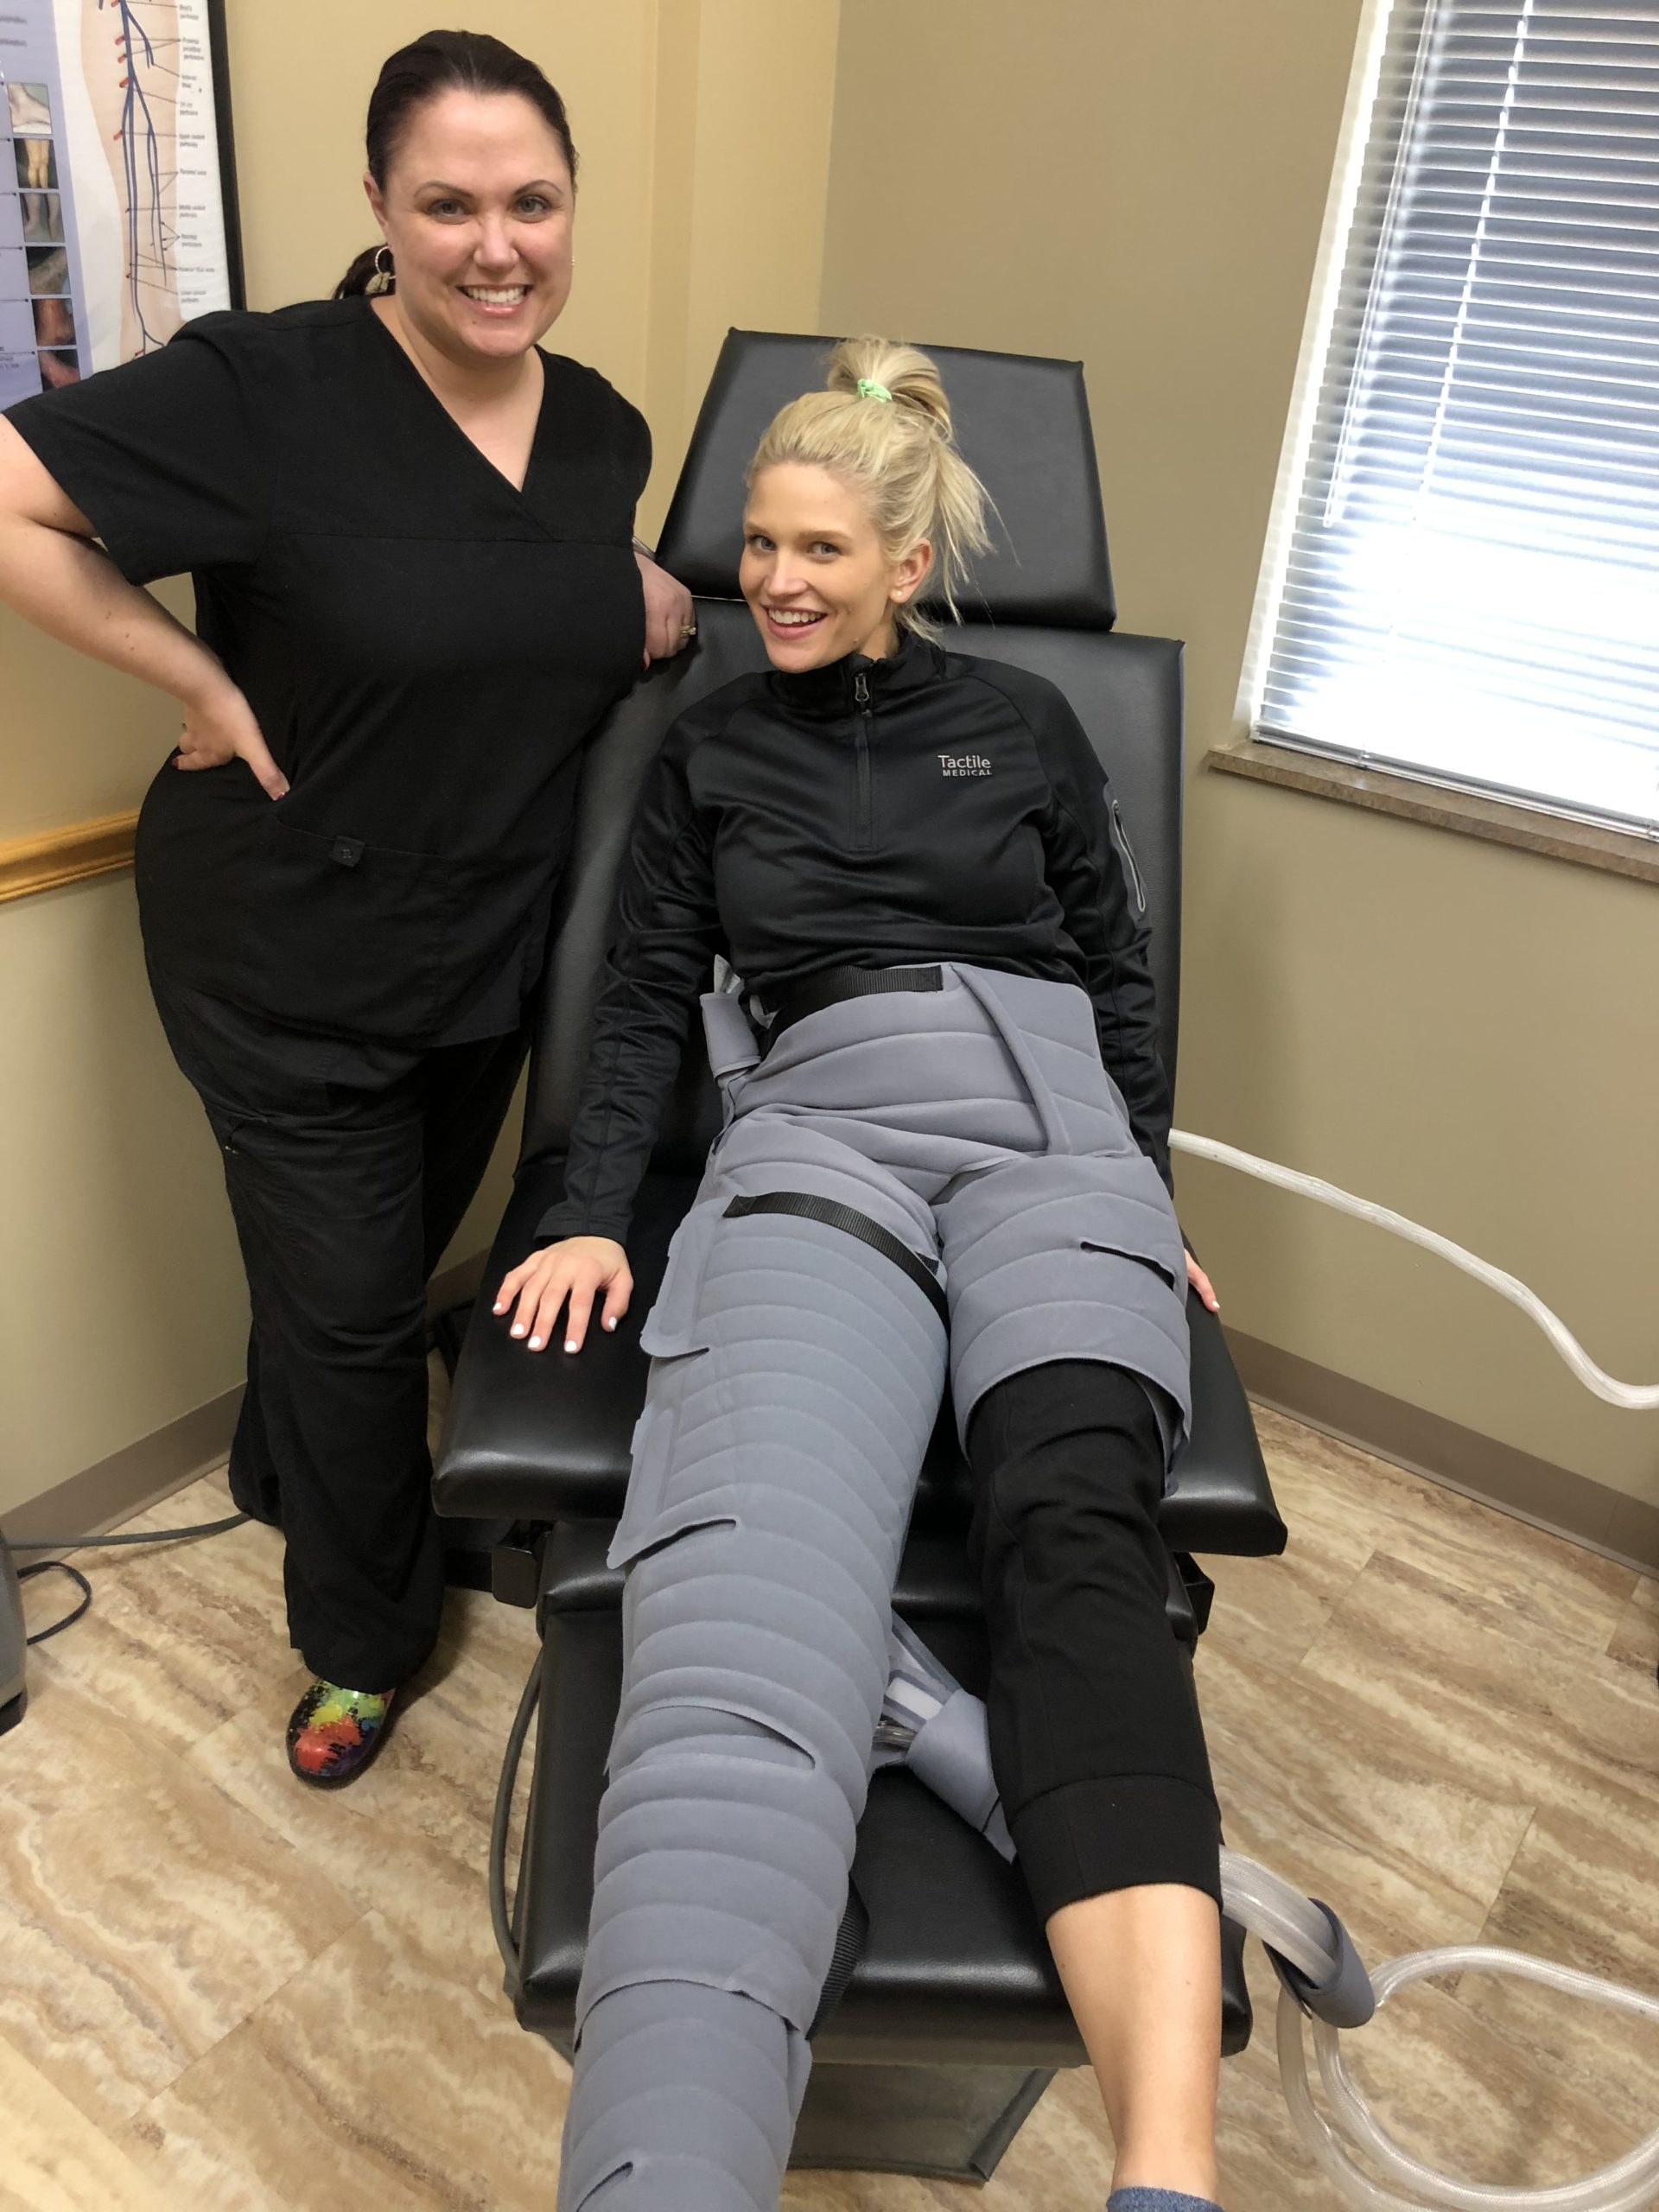 How to Manage Lipedema & Lipo Lymphedema with Compression Garments